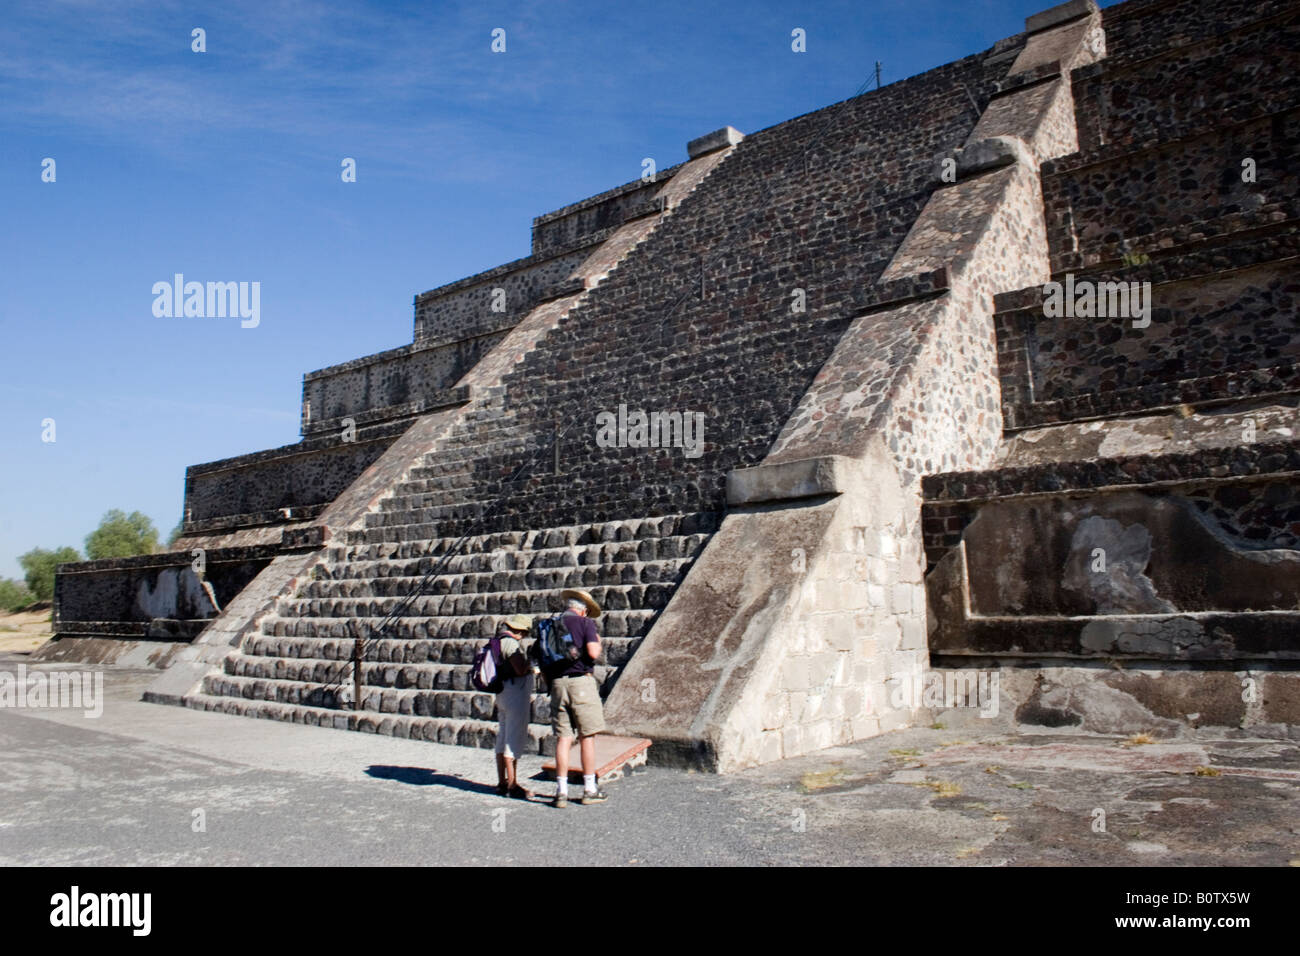 Tourists prepare to climb the Pyramid of the Moon at Teotihuacan, Mexico's third largest pyramid in the pre-Columbian cities, Stock Photo